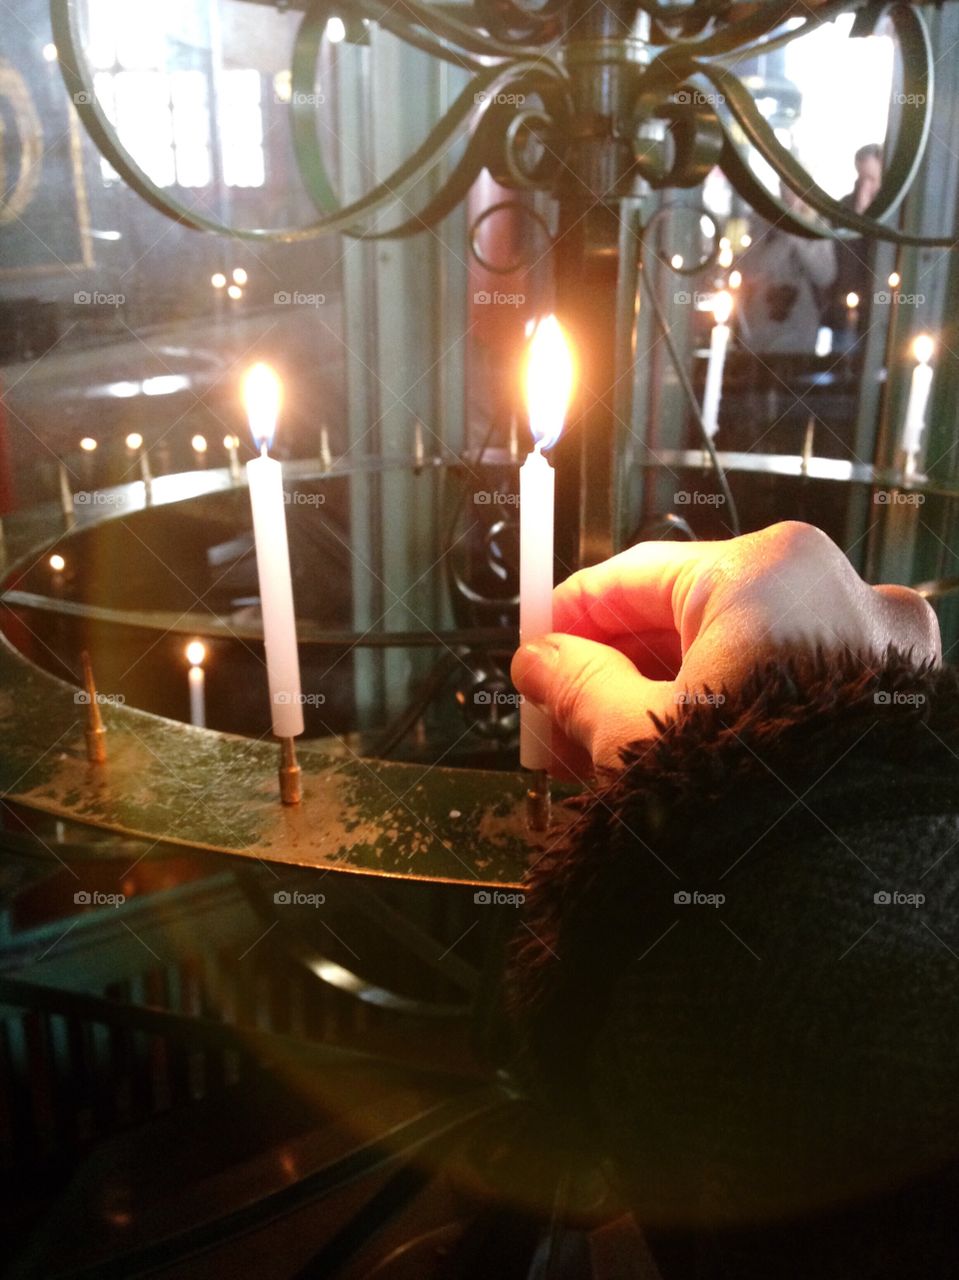 Pray. Light a candle and pray for all the best in life at Asakusa Temple, Tokyo.